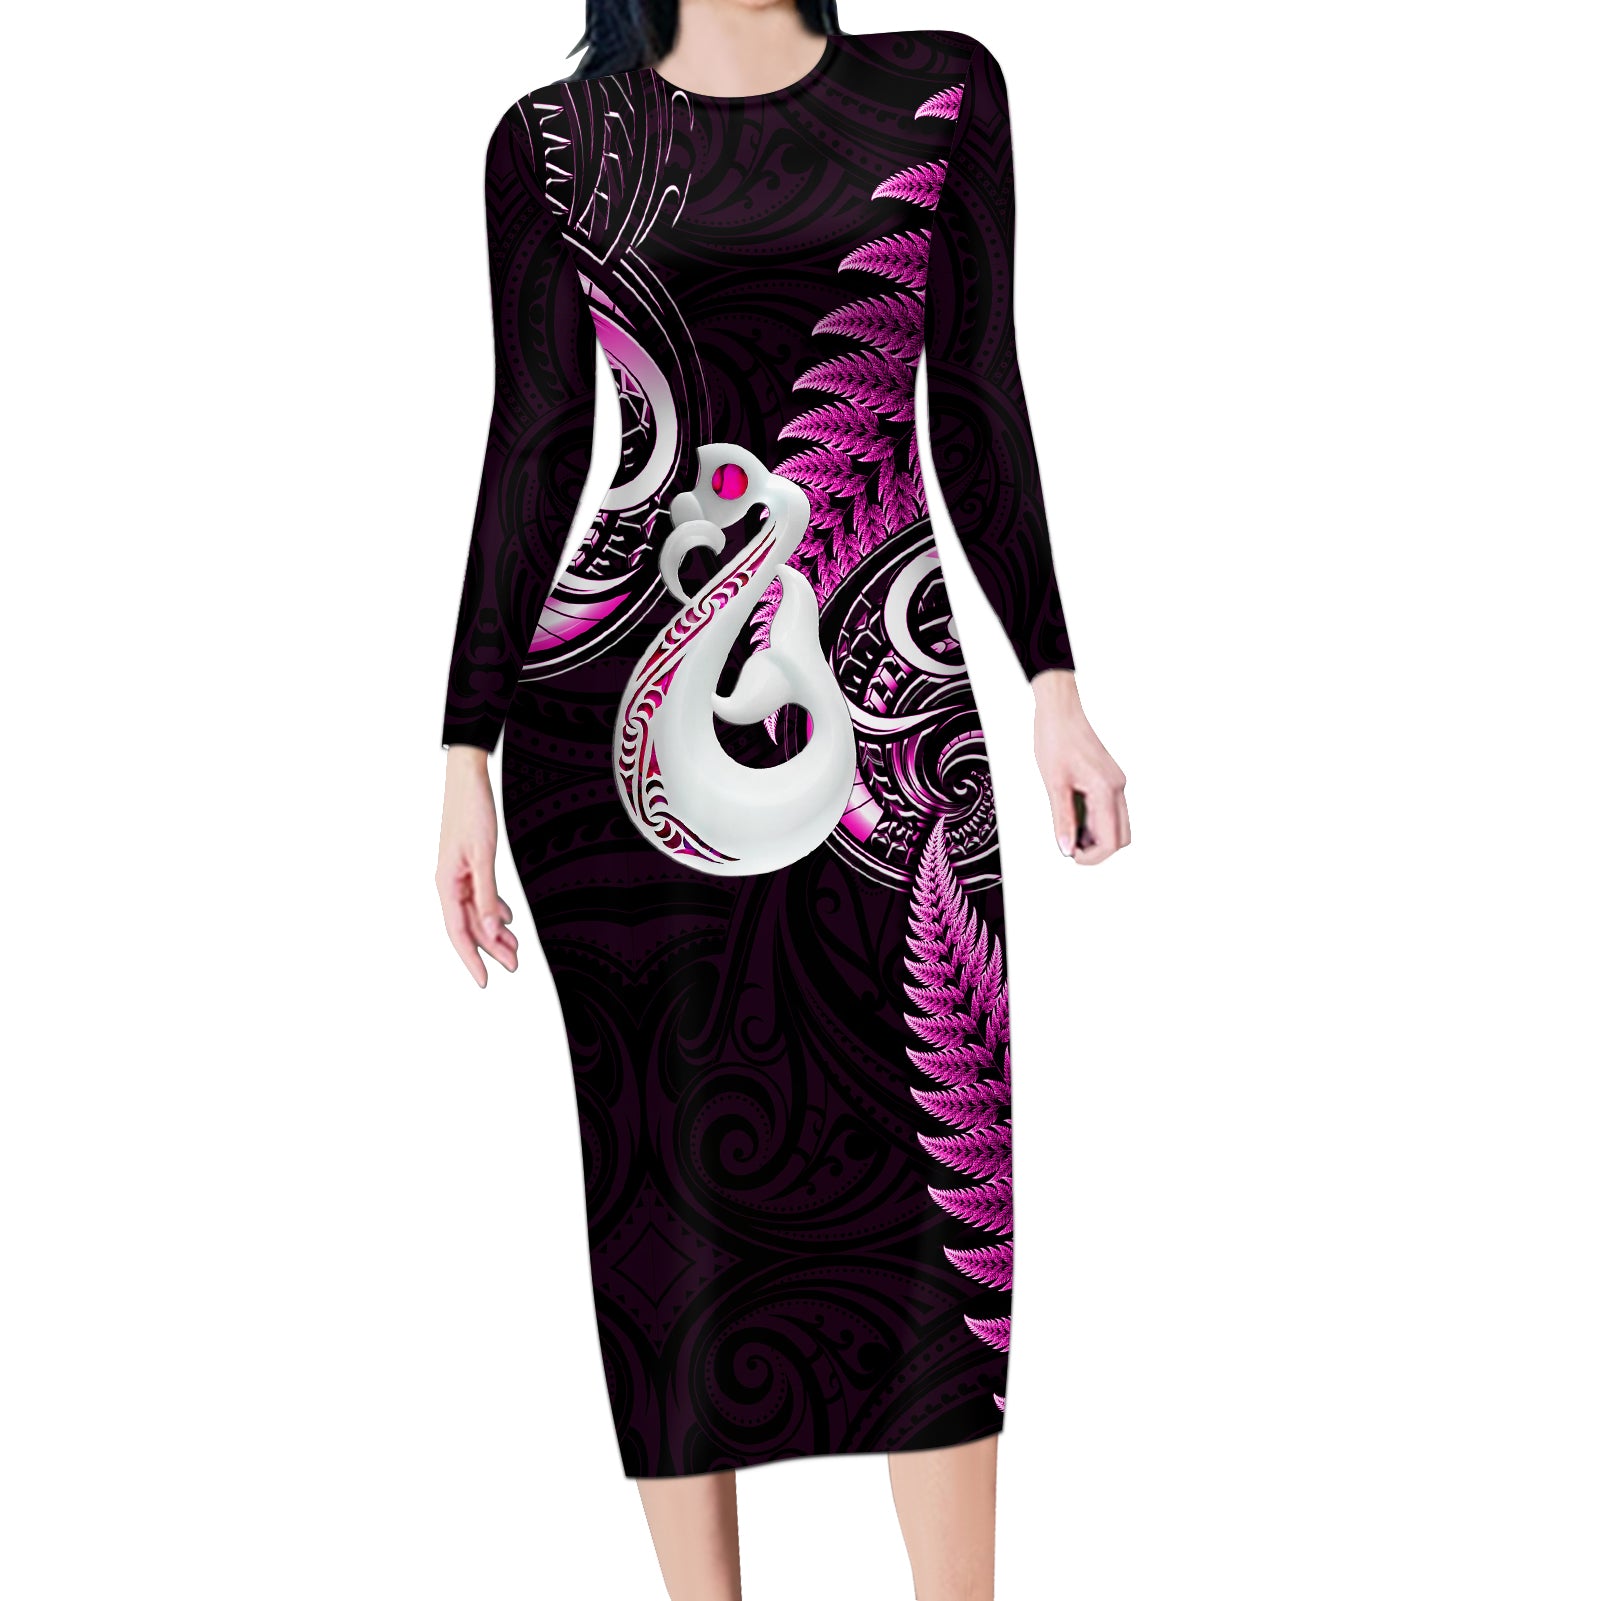 Personalised New Zealand Long Sleeve Bodycon Dress Aotearoa Silver Fern With Manaia Maori Unique Pink LT14 Long Dress Pink - Polynesian Pride